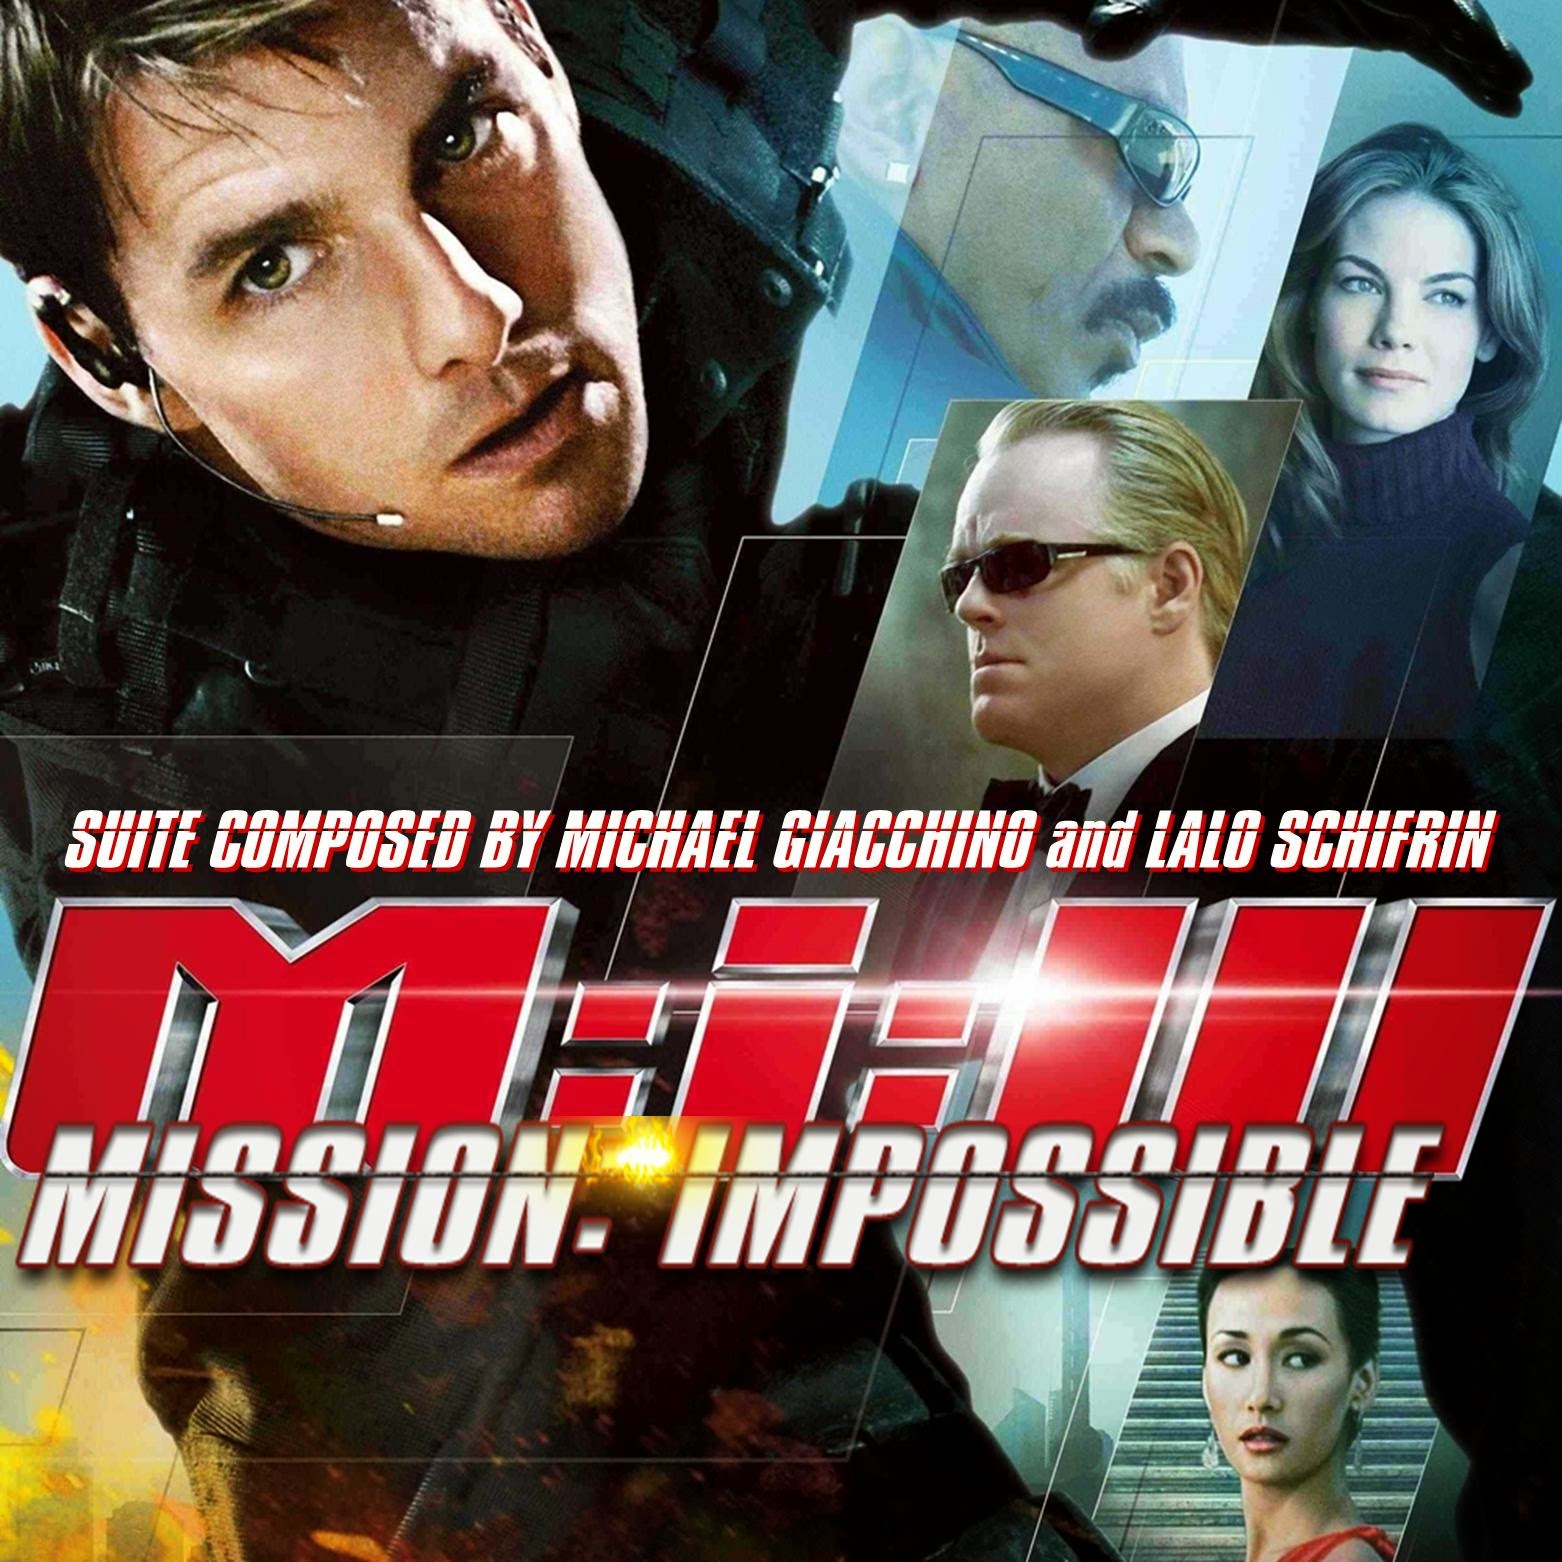 Mission impossible 3 online, free 123movies